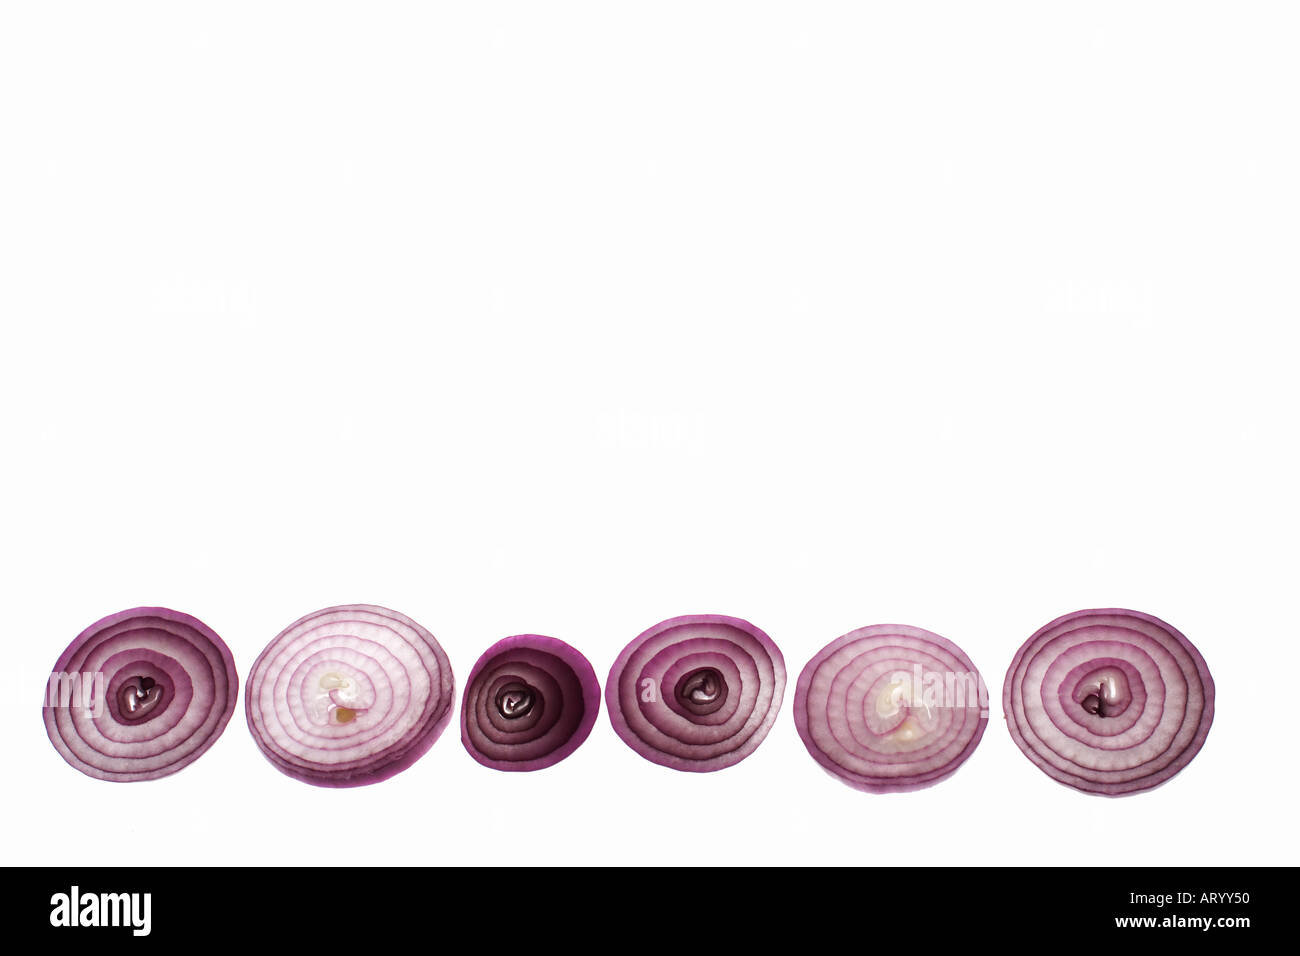 Red onion slices against white background Stock Photo